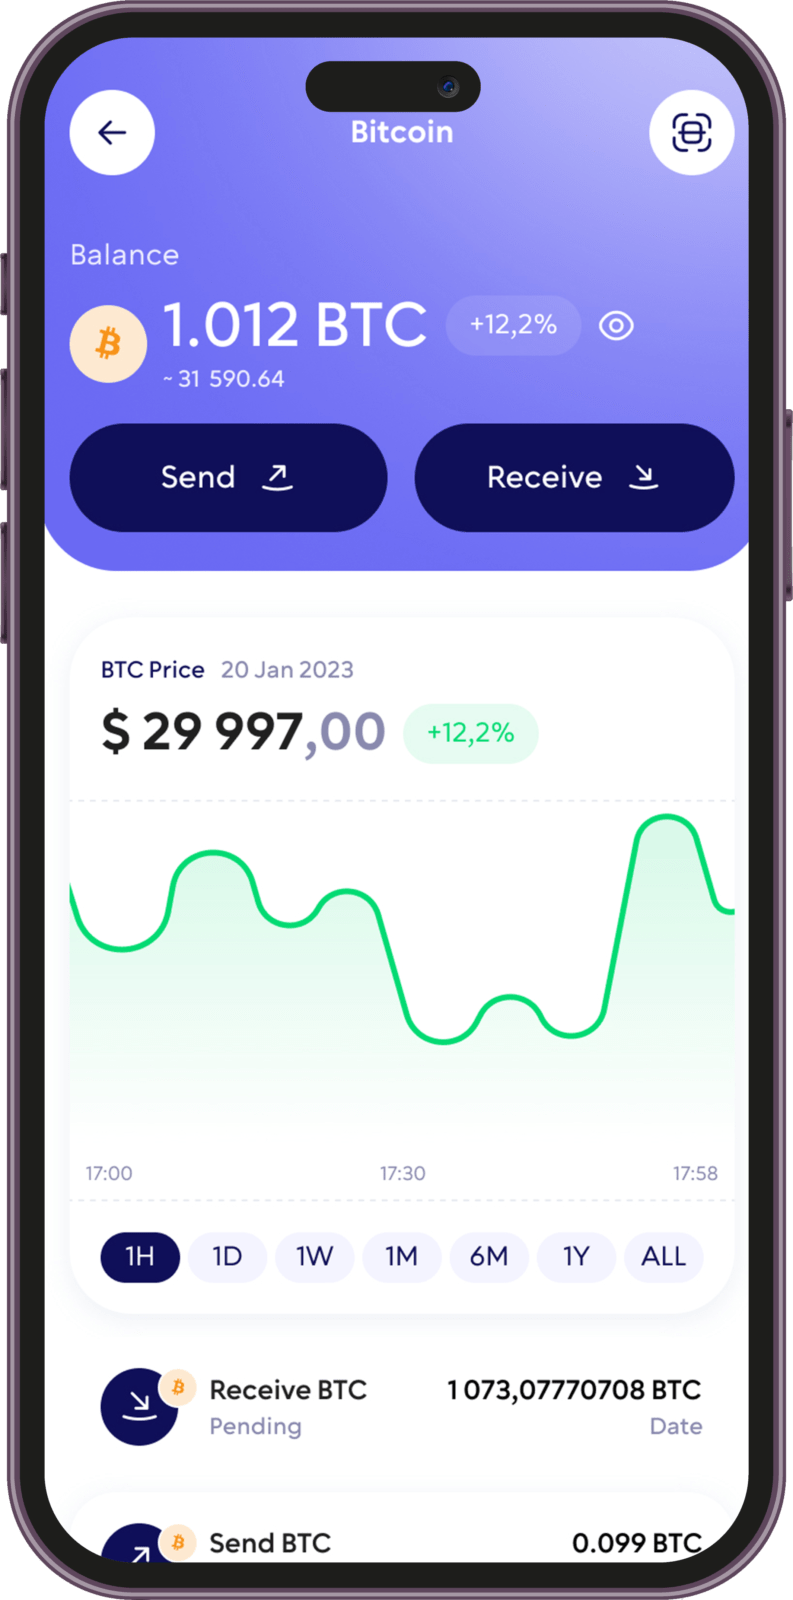 Walleterse crypto wallet - Buy, Sell, and Trade